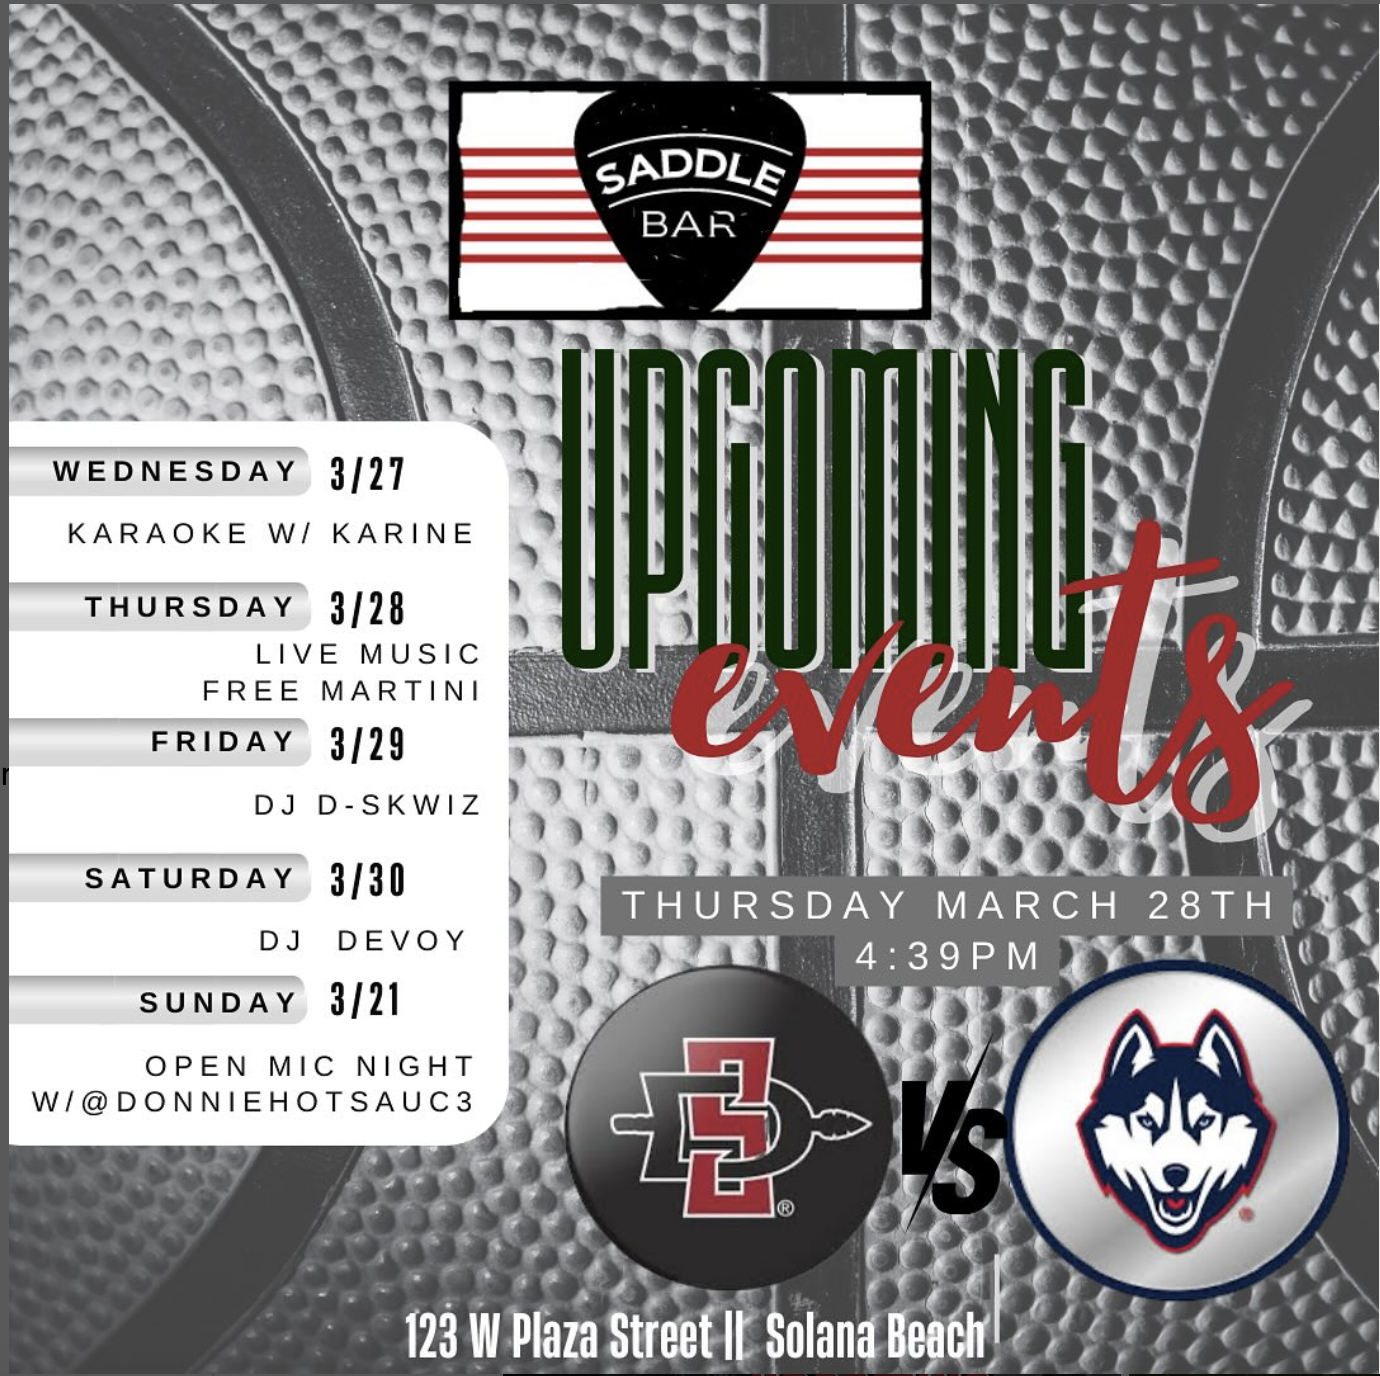 Events this week at The Saddle Bar!